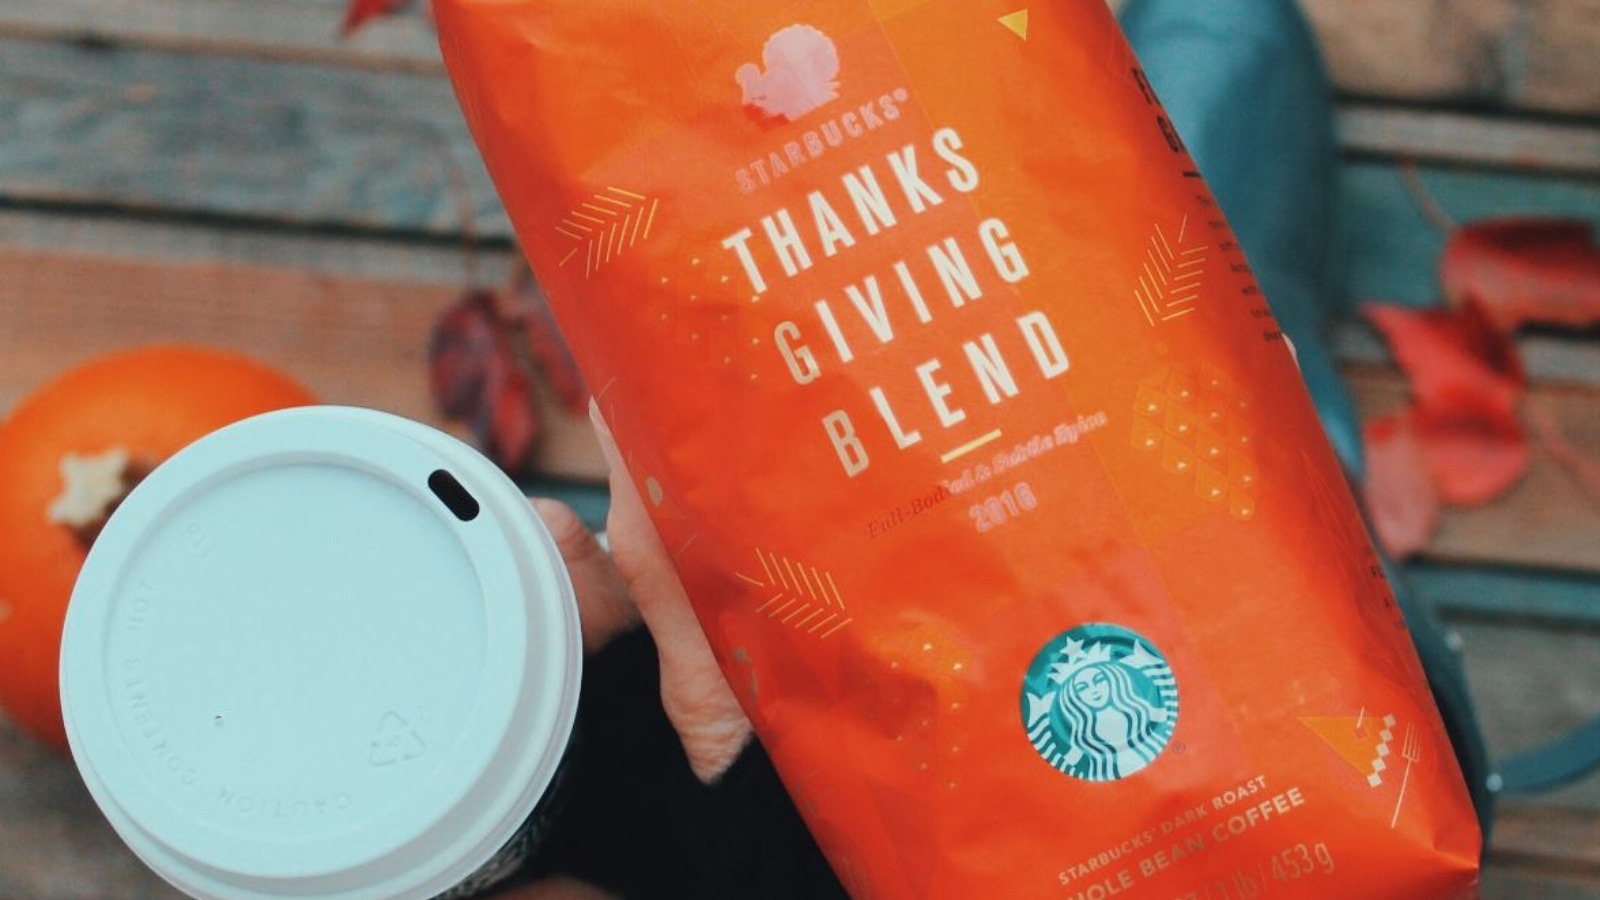 Starbucks' Thanksgiving Blend Was Designed To Pair Perfectly With The Feast